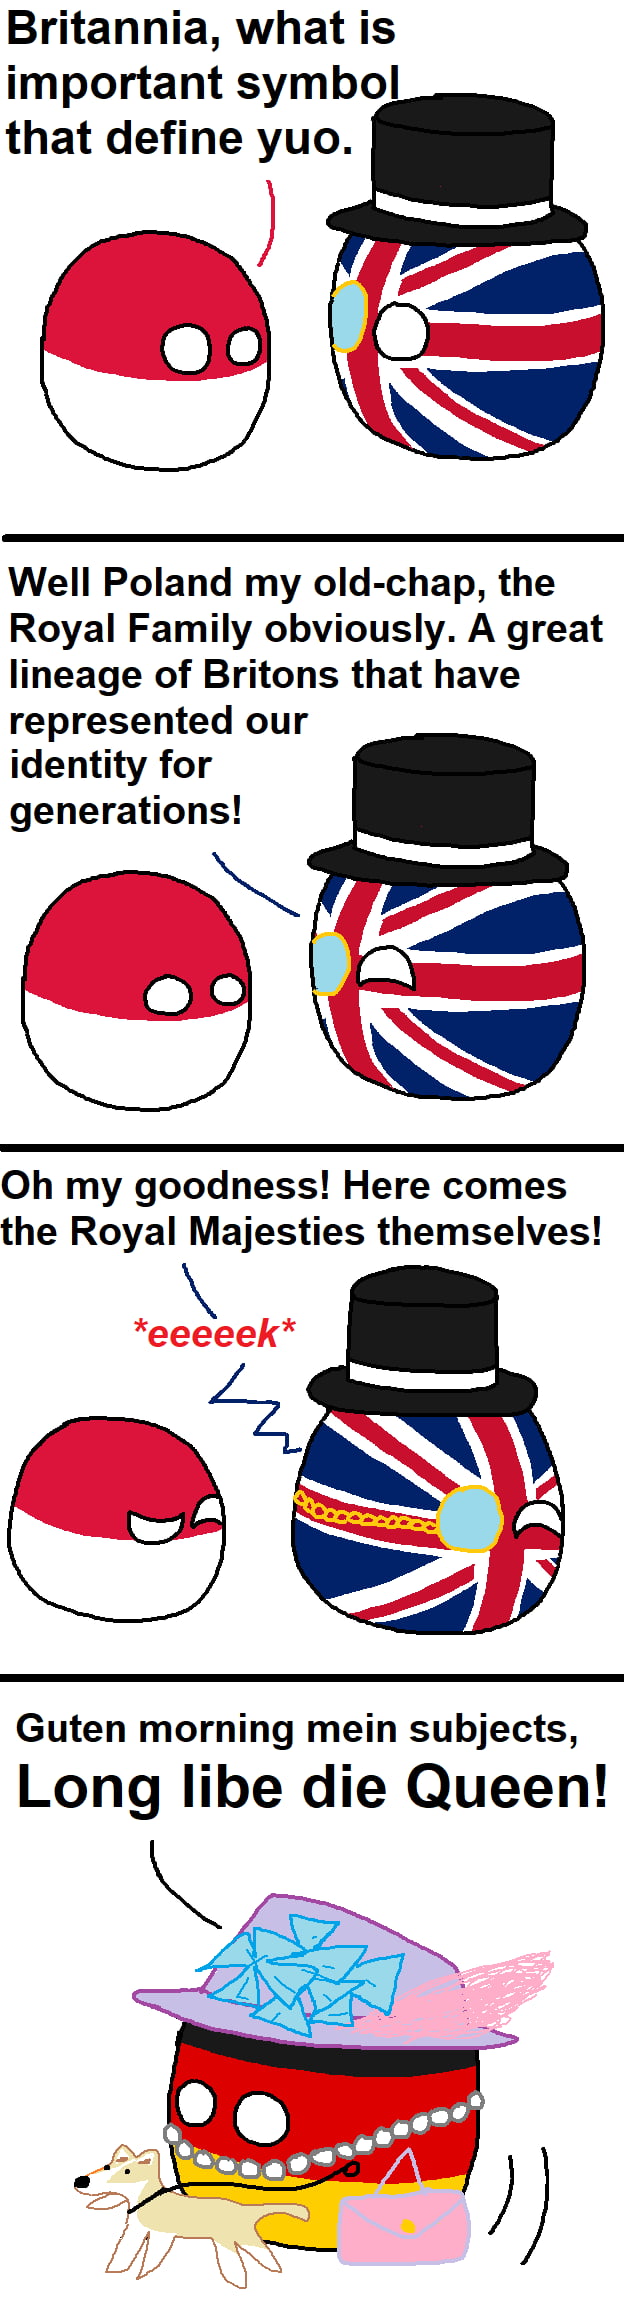 As British as the Monarchy